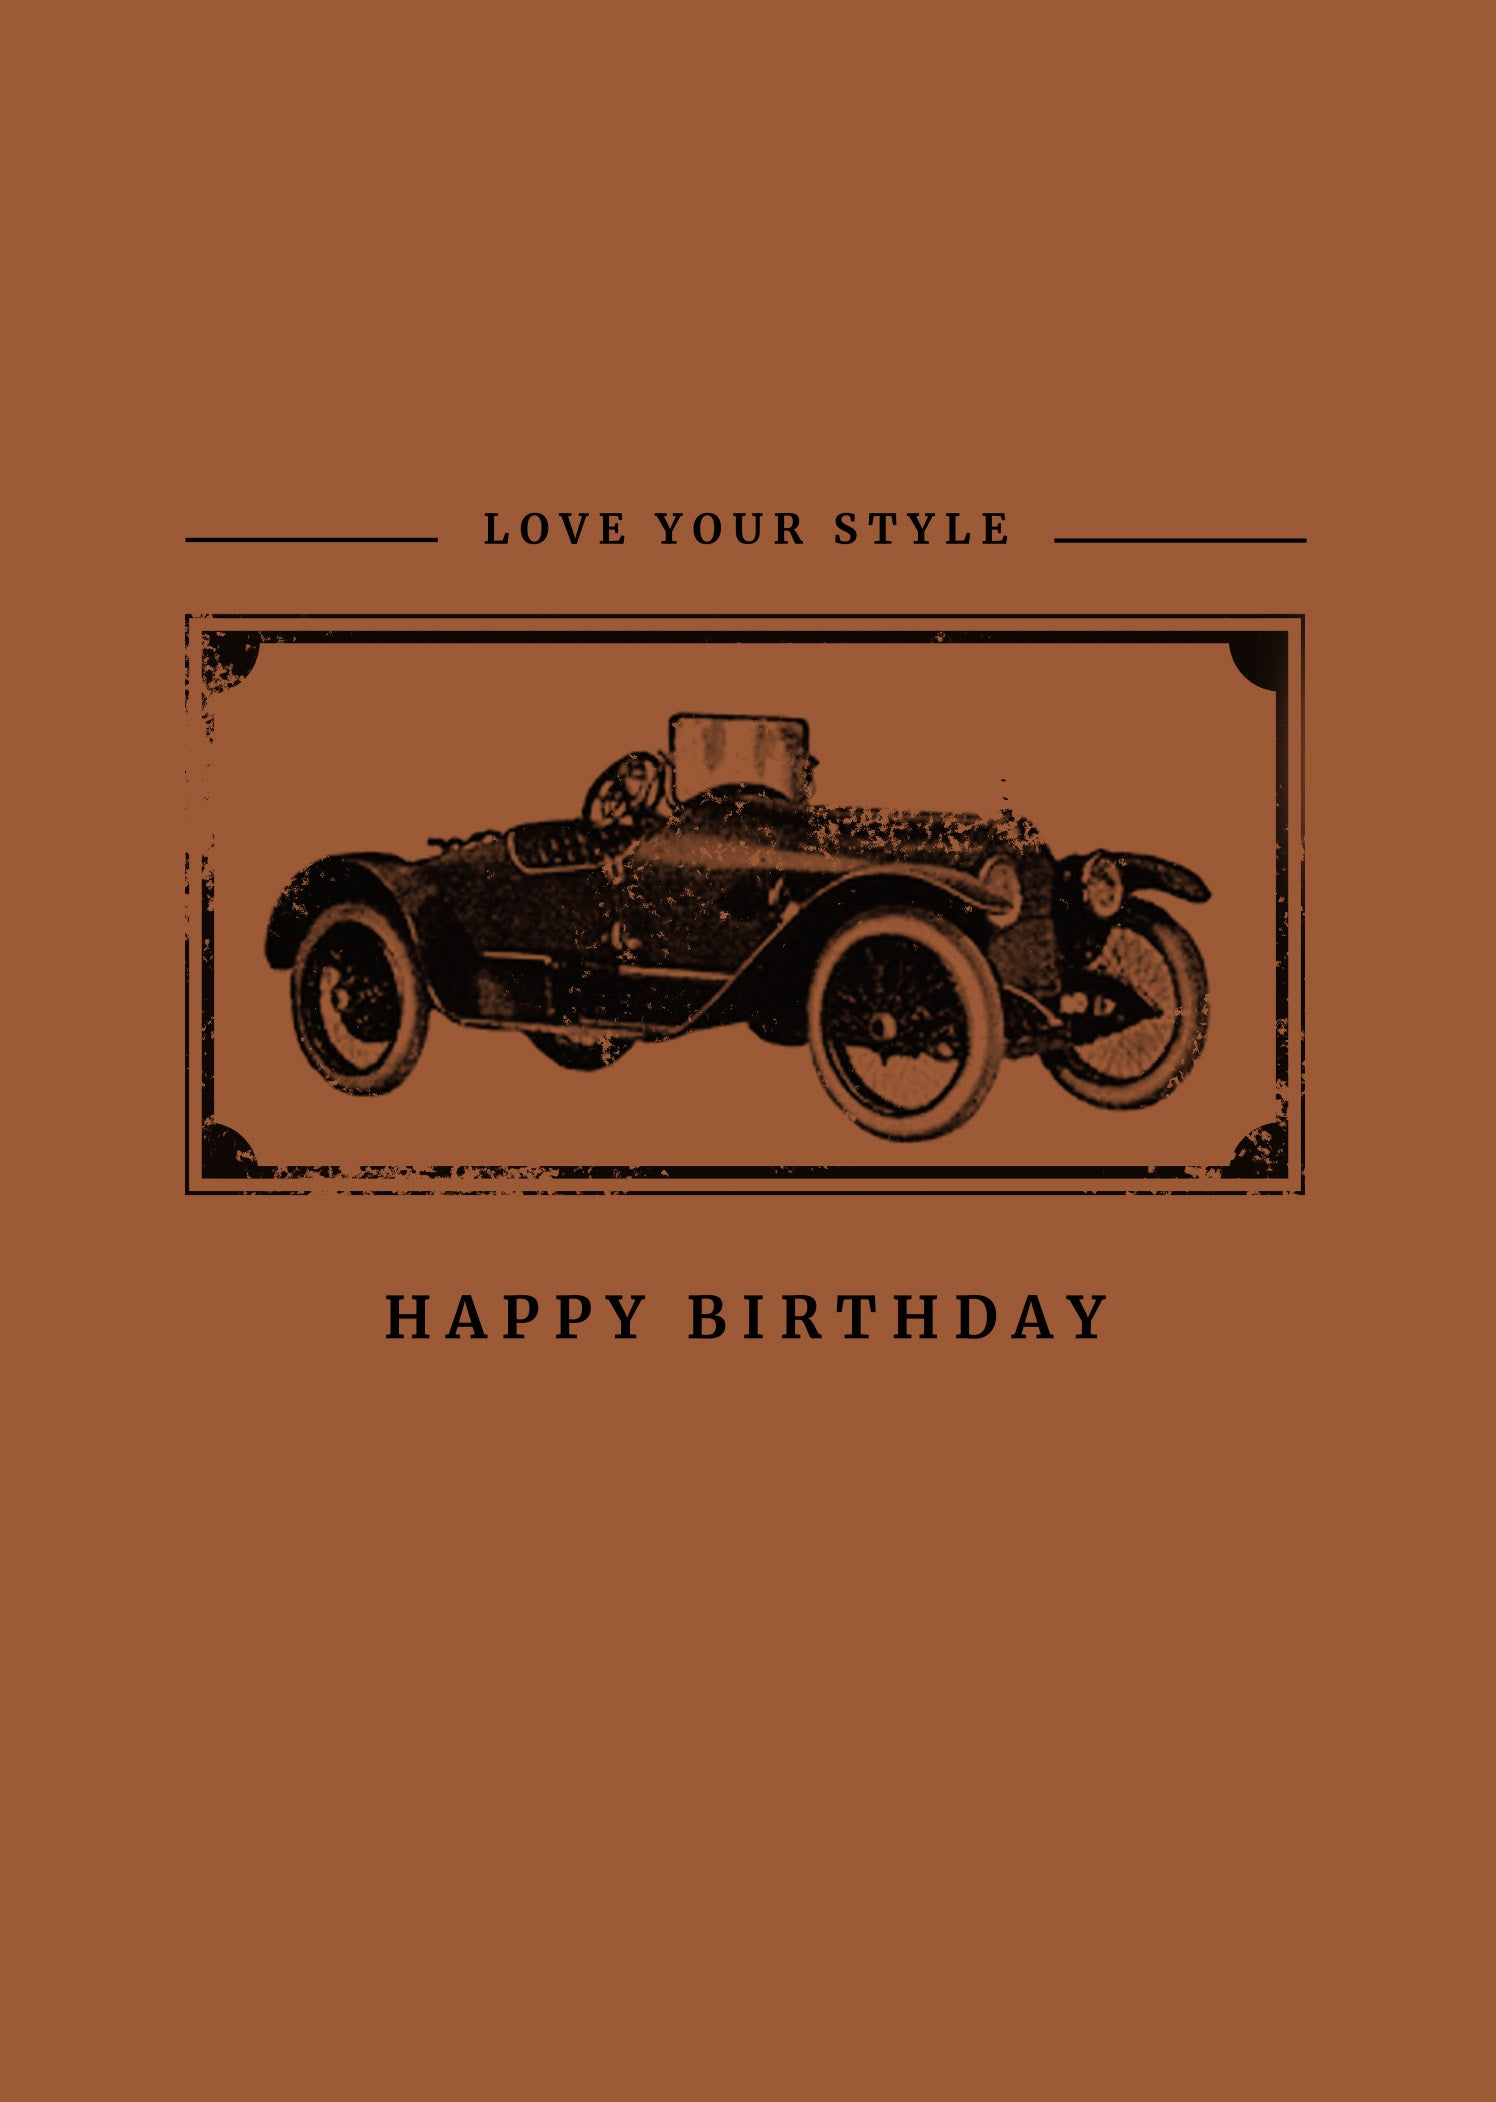 Greeting Card LEGEND - LOVE YOUR STYLE